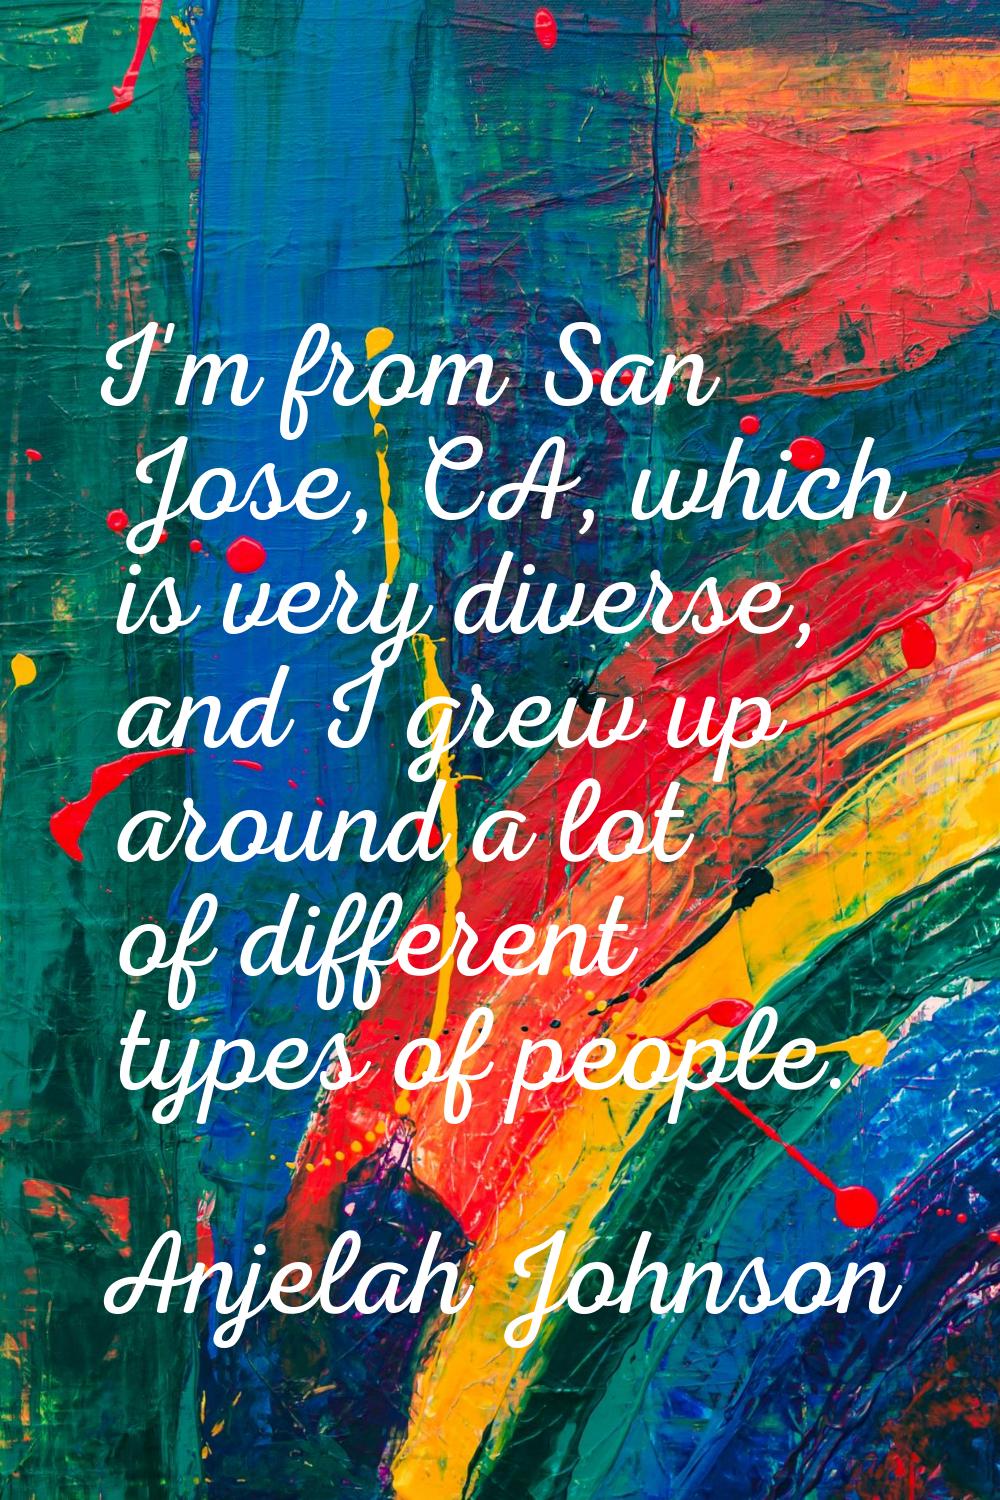 I'm from San Jose, CA, which is very diverse, and I grew up around a lot of different types of peop